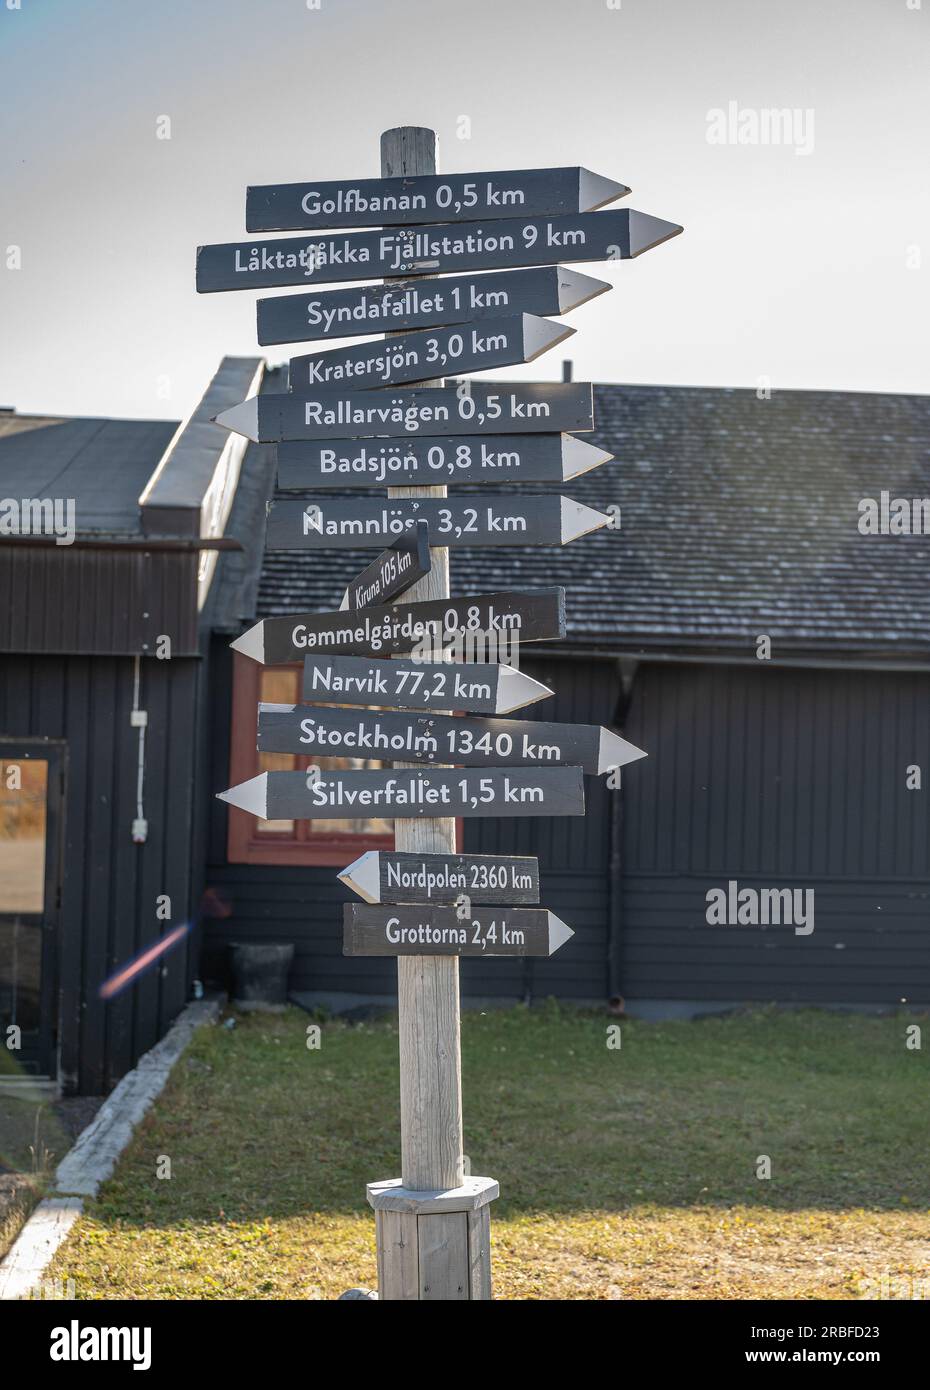 signpost Abisko Sweden Arctic Circle indicates distance and direction to various towns and sites of interest like Northpole and Stockholm Stock Photo